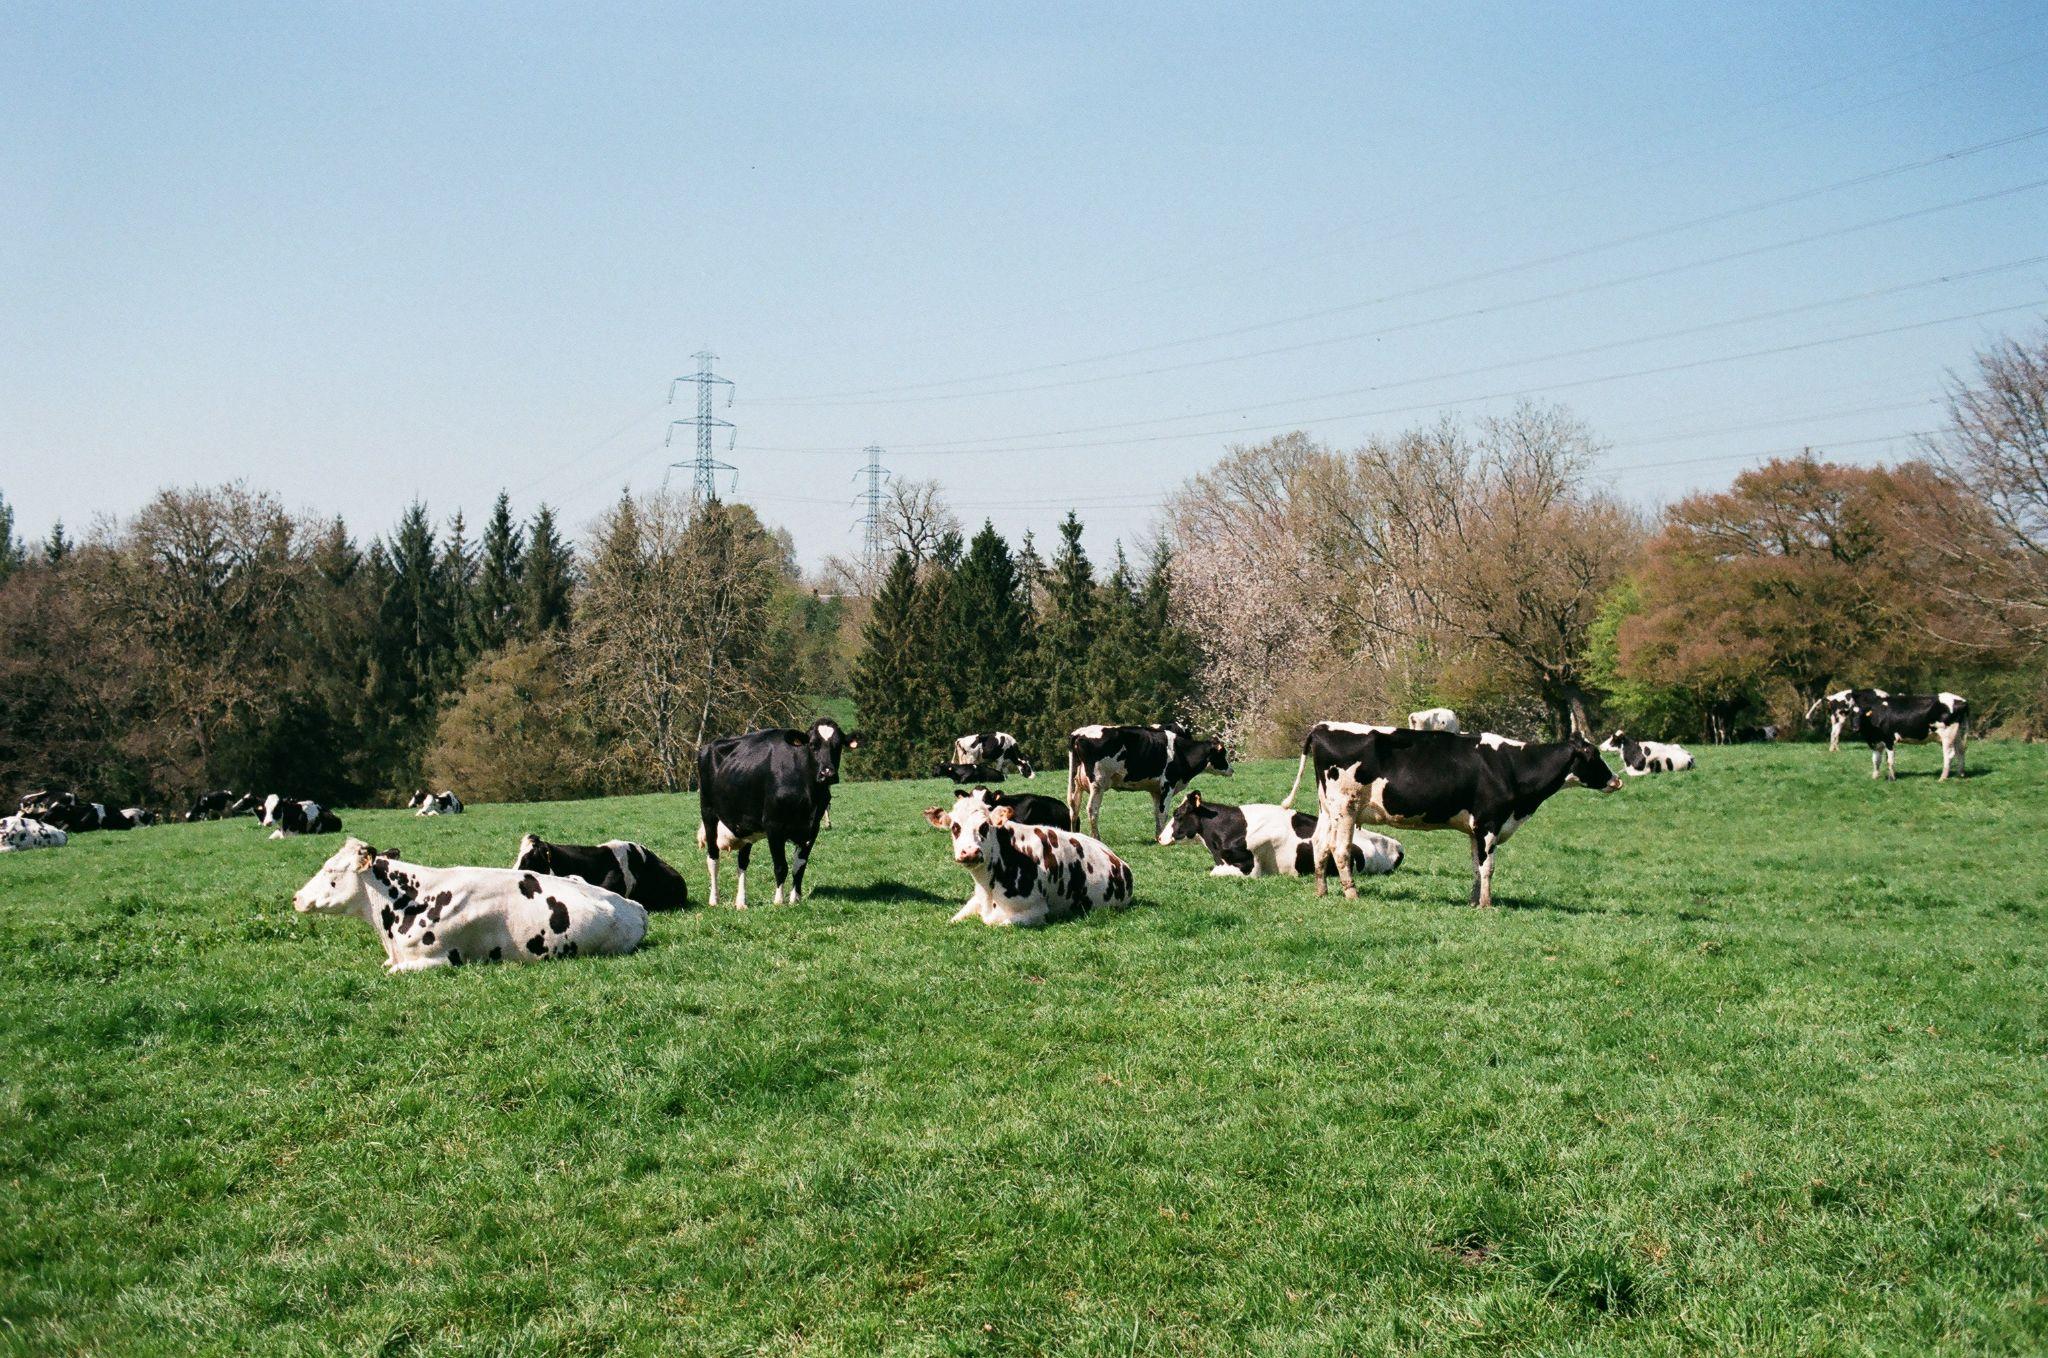 Many cows grazing in the field.